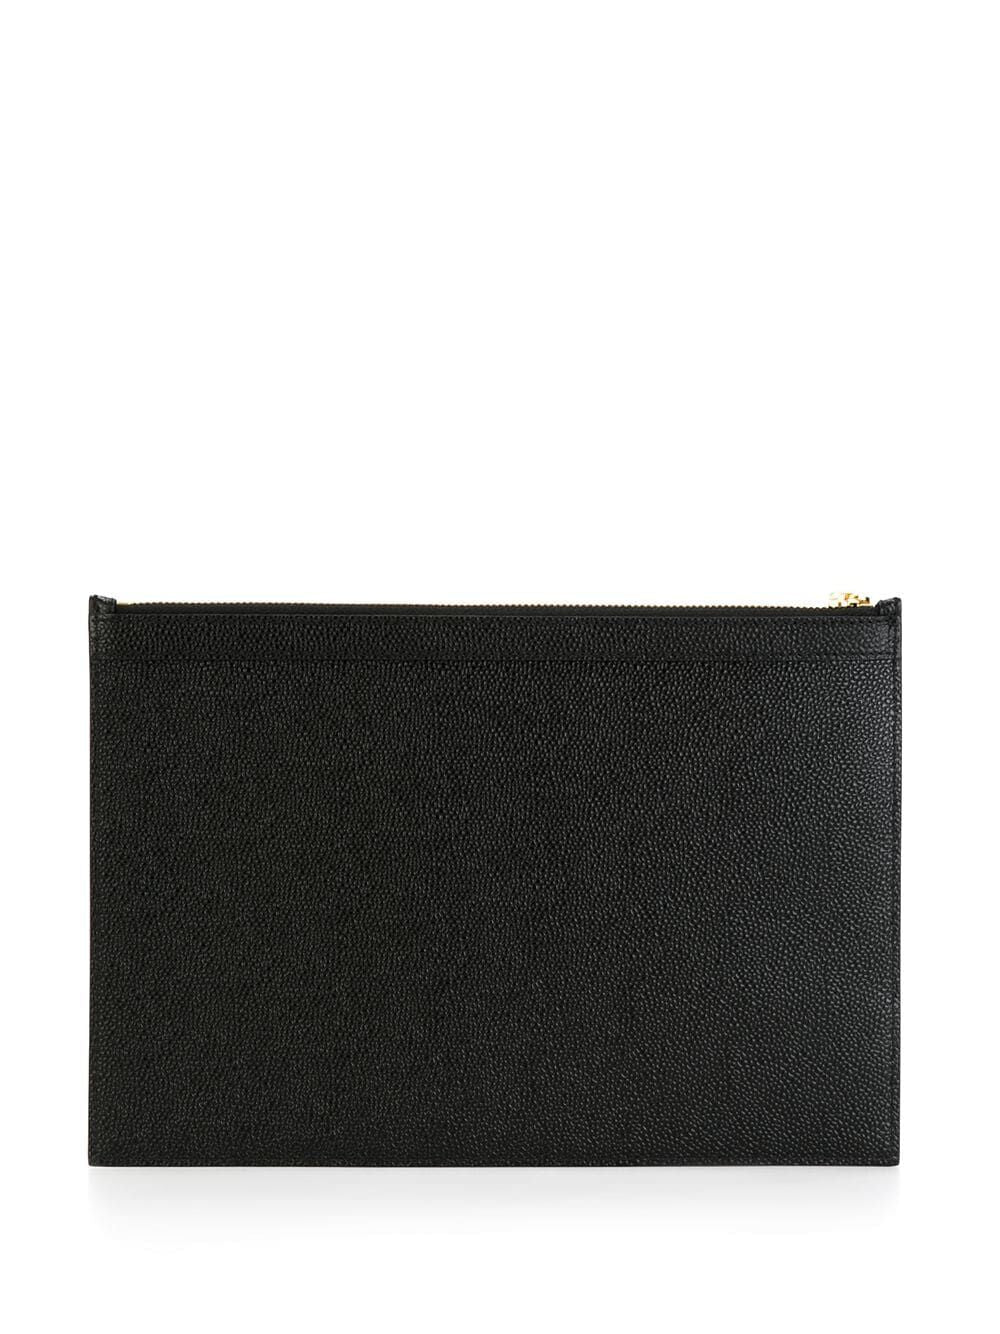 Small Document Holder In Pebble Grain Leather